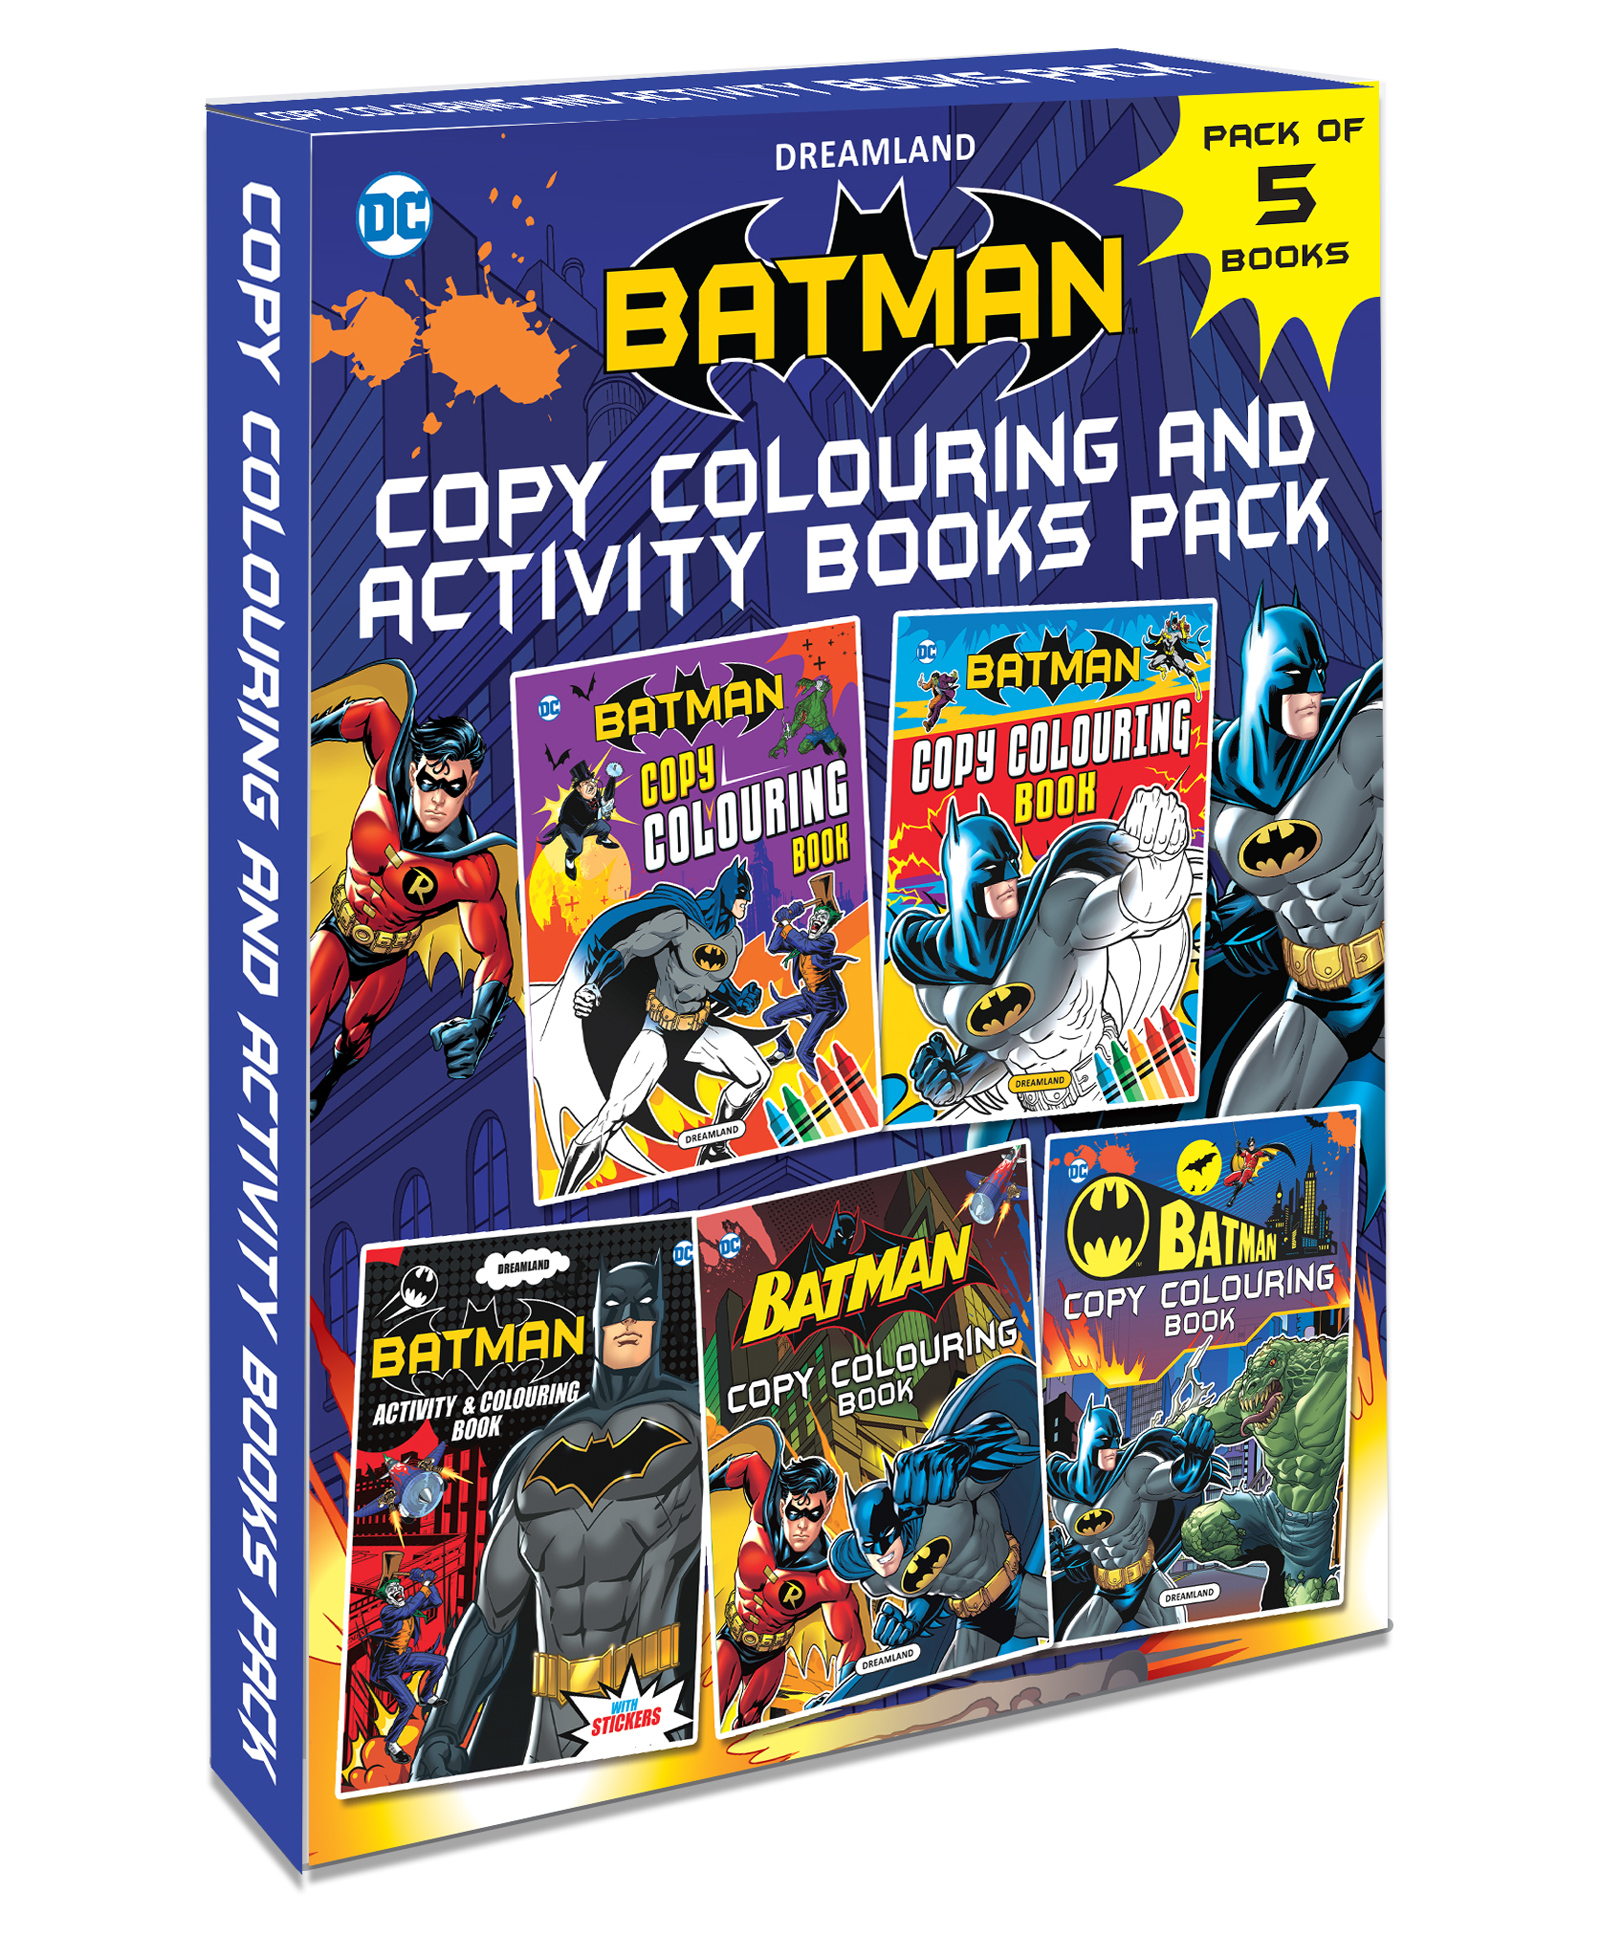 Dreamland Batman Copy Colouring and Activity Books Pack A Pack of 5 Books -  English Online in India, Buy at Best Price from  - 12874746